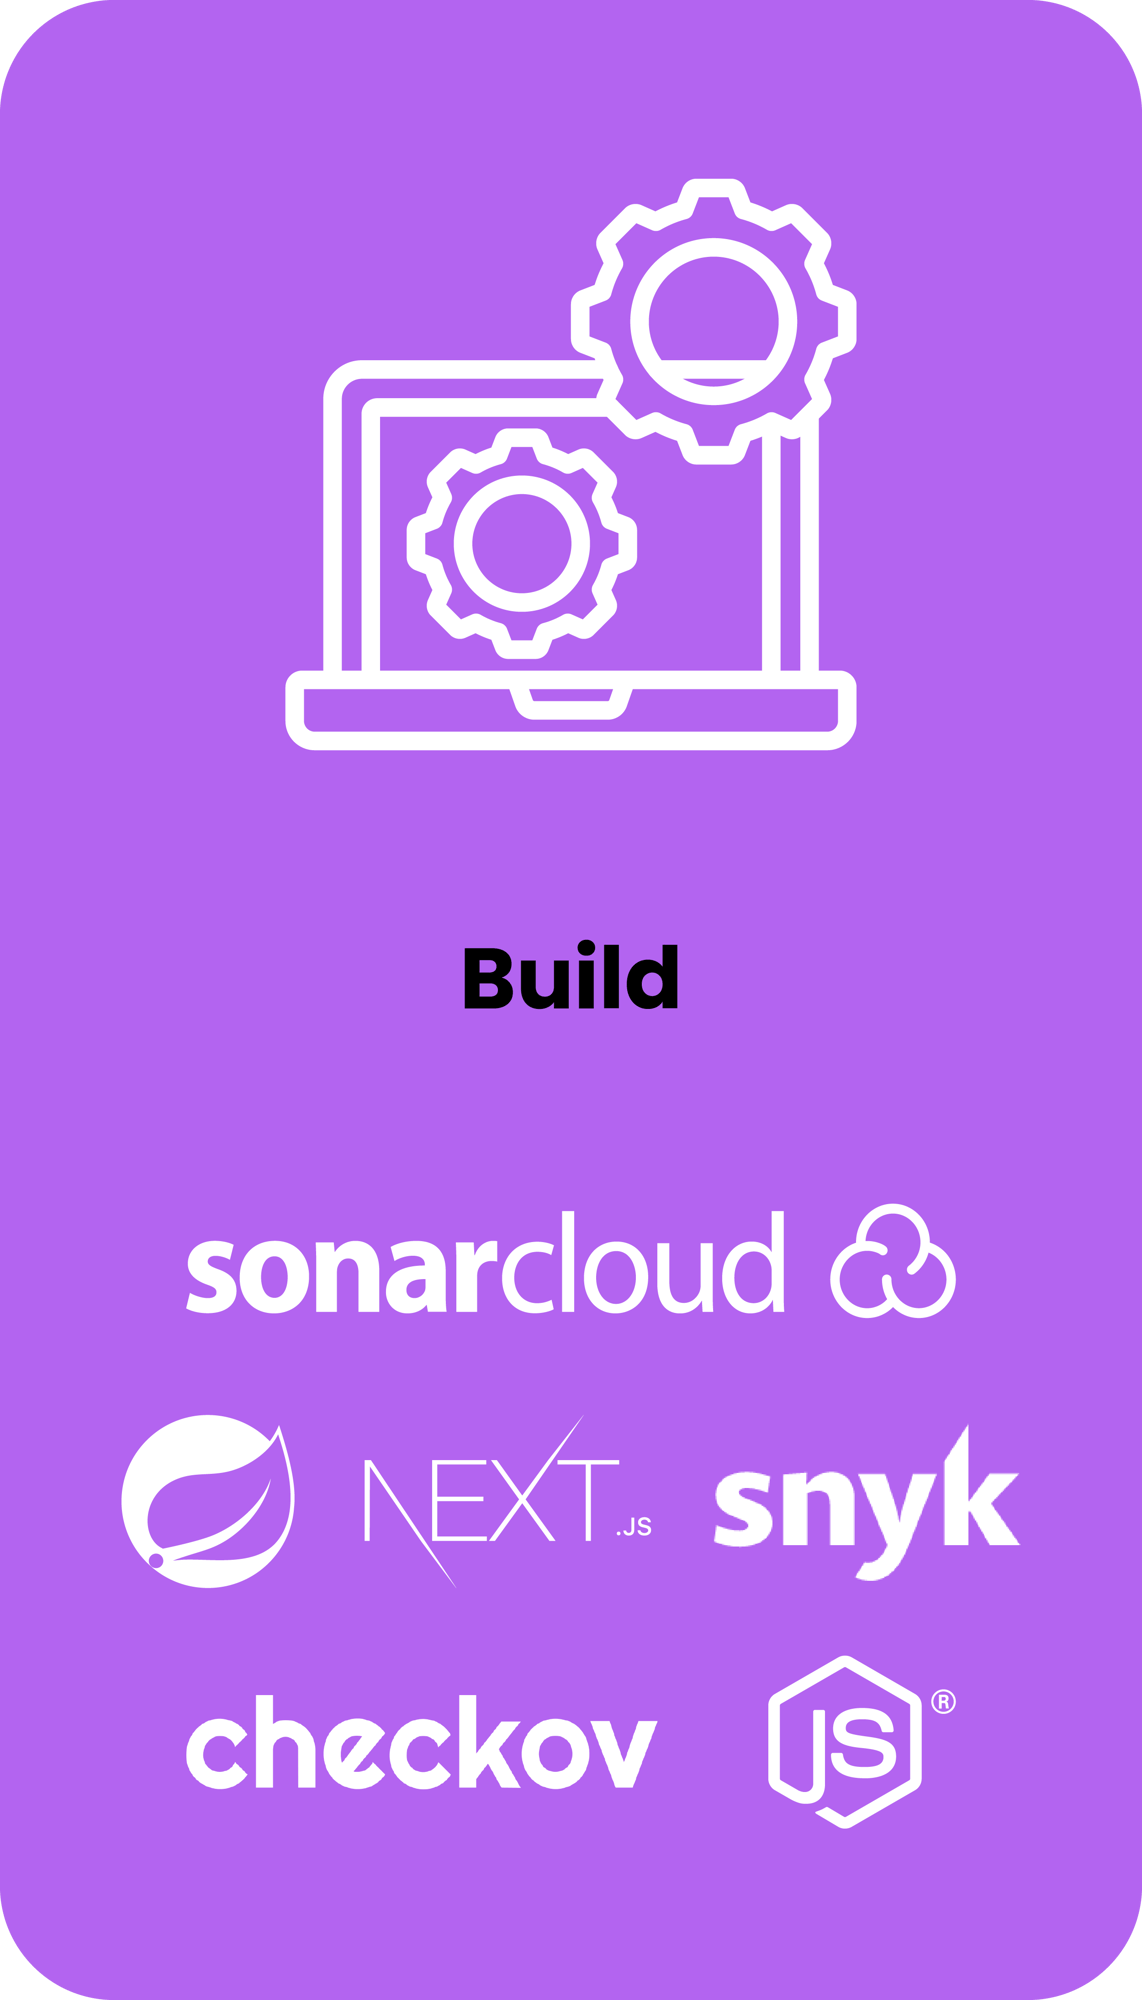 Build. Technologies include Next.js, Spring Boot, Snyk, Checkov, and SonarCloud.